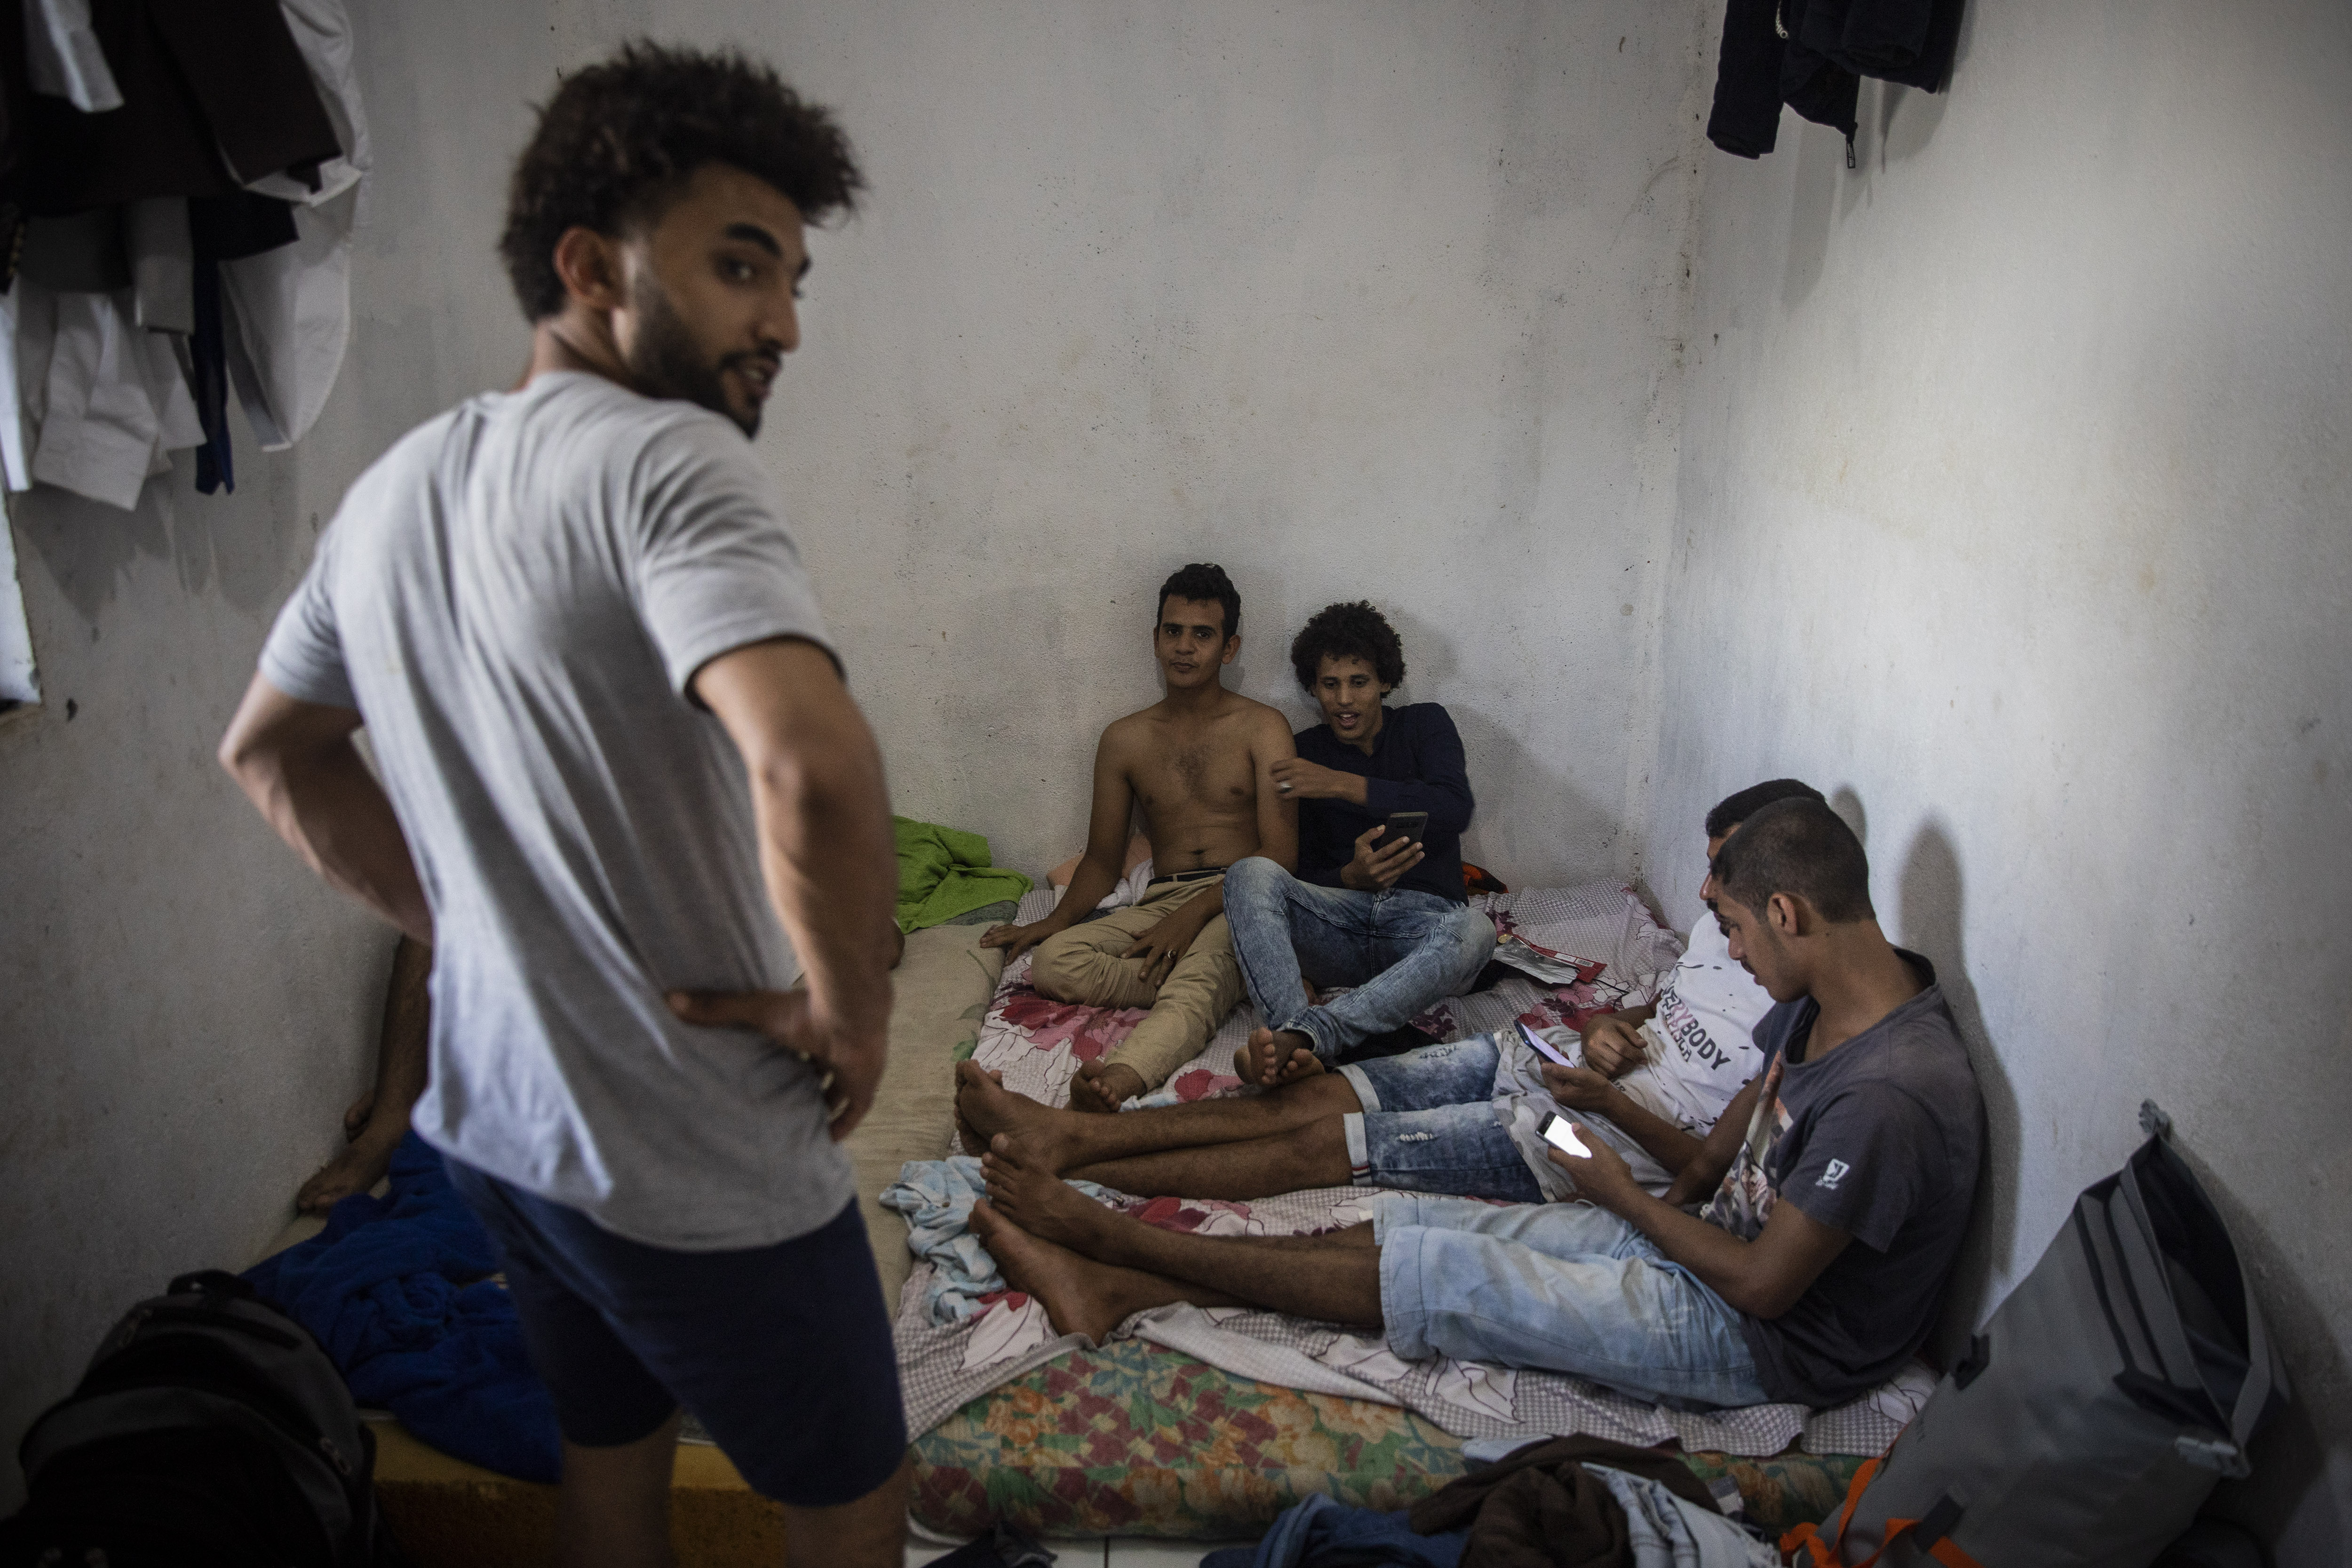 Yemeni youth kill time at a house where 6 of them reside, in the French island of Mayotte, waiting to receive documents and permission from the authorities to leave the island.